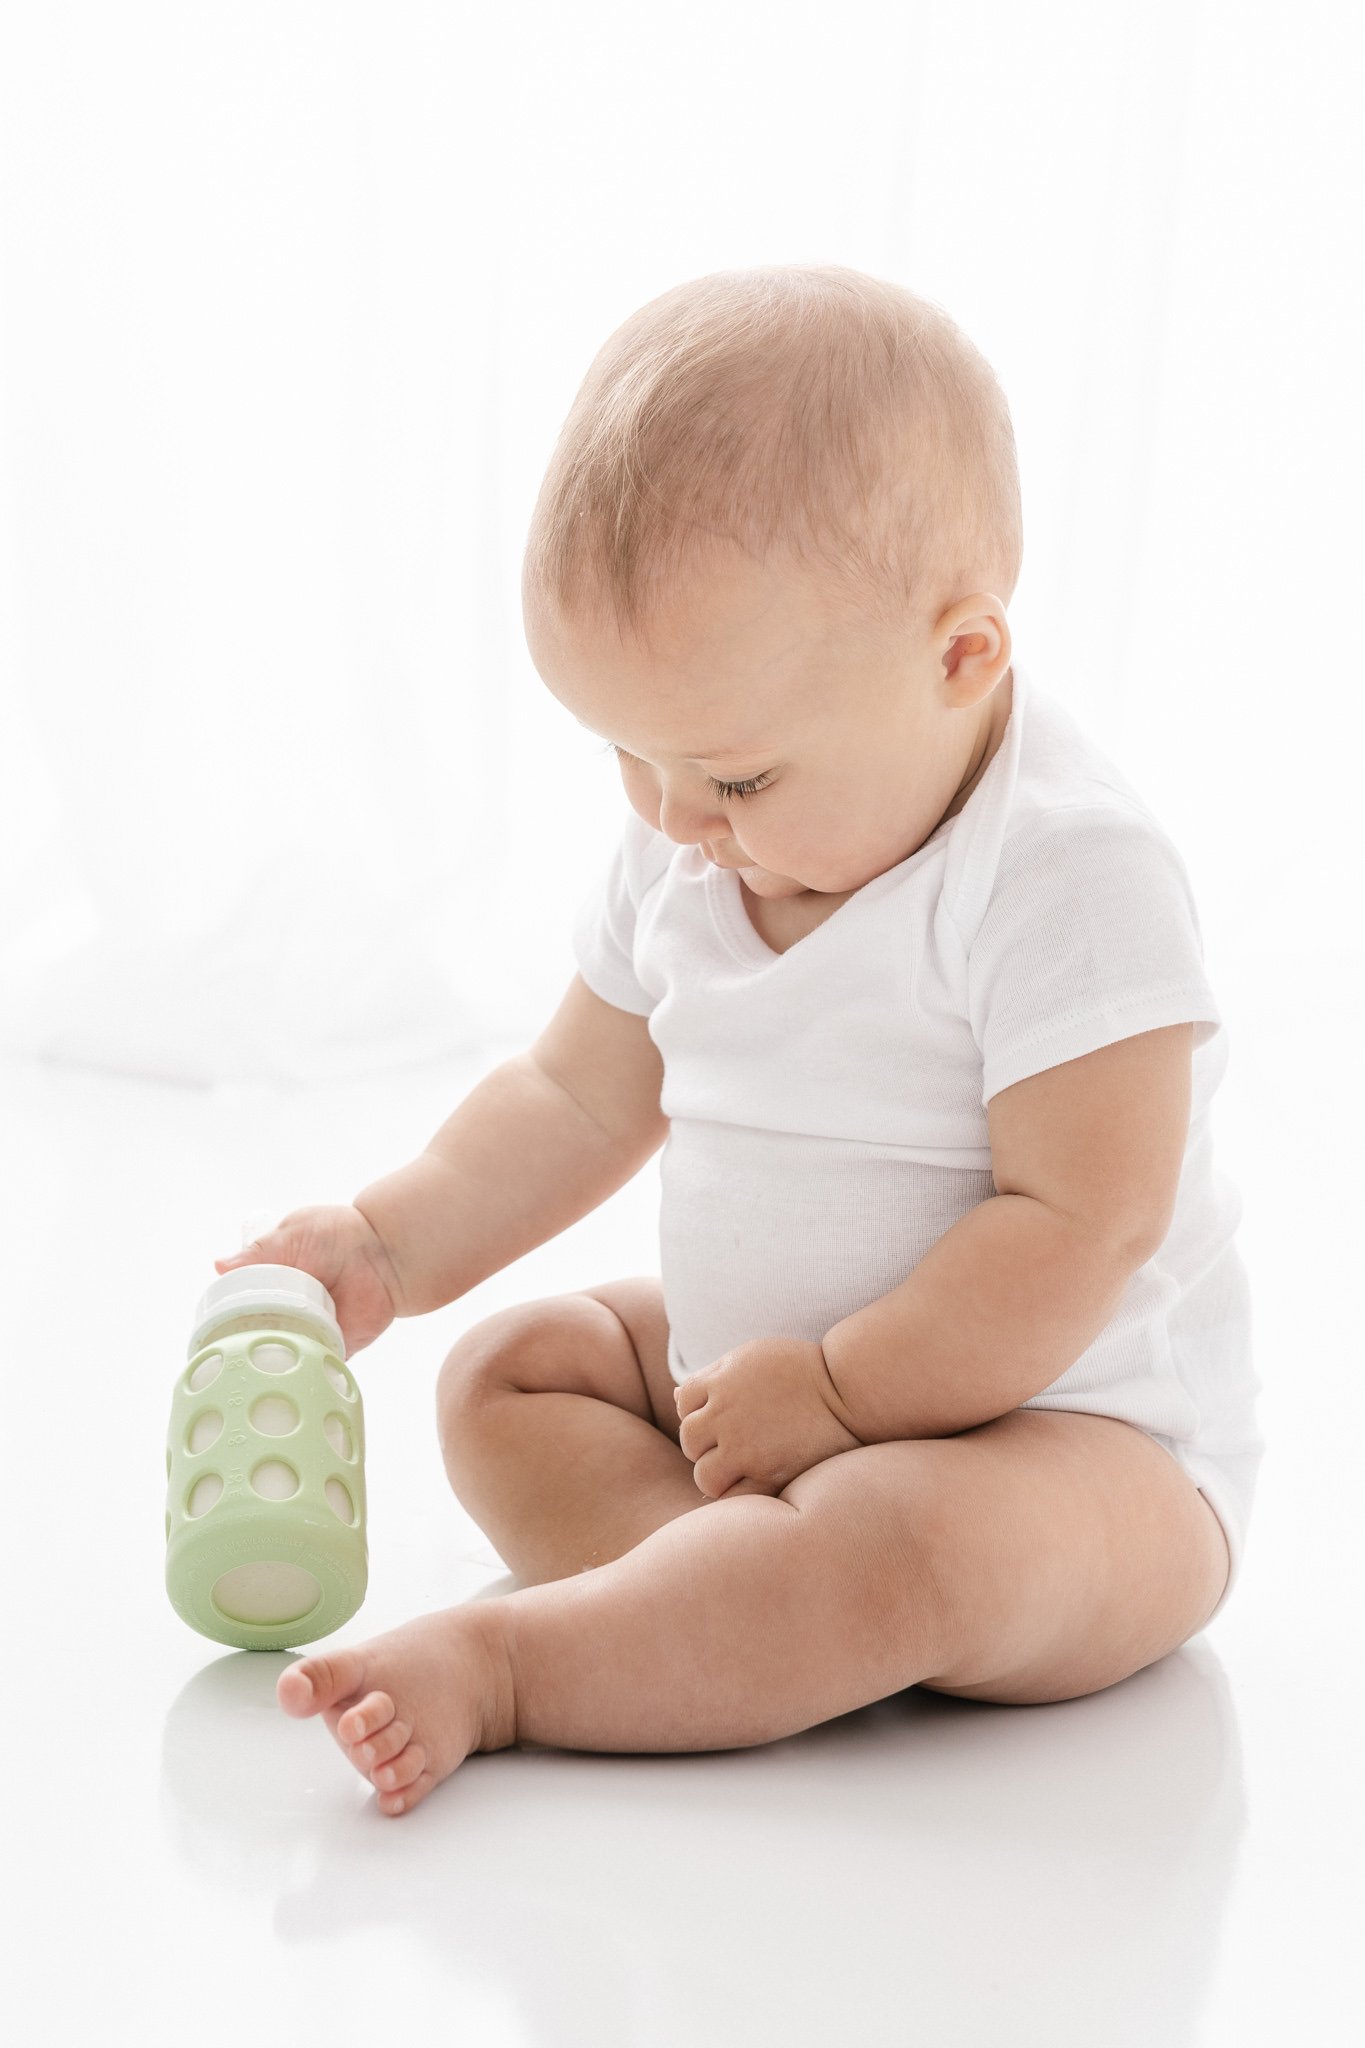  In a New Jersey studio, a baby plays with her bottle while wearing a white onesie by Nicole Hawkins Photography. baby playing with bottle green bottle #NicoleHawkinsPhotography #NicoleHawkinsNewborns #studionewborns #studioportraits #babystudioportr